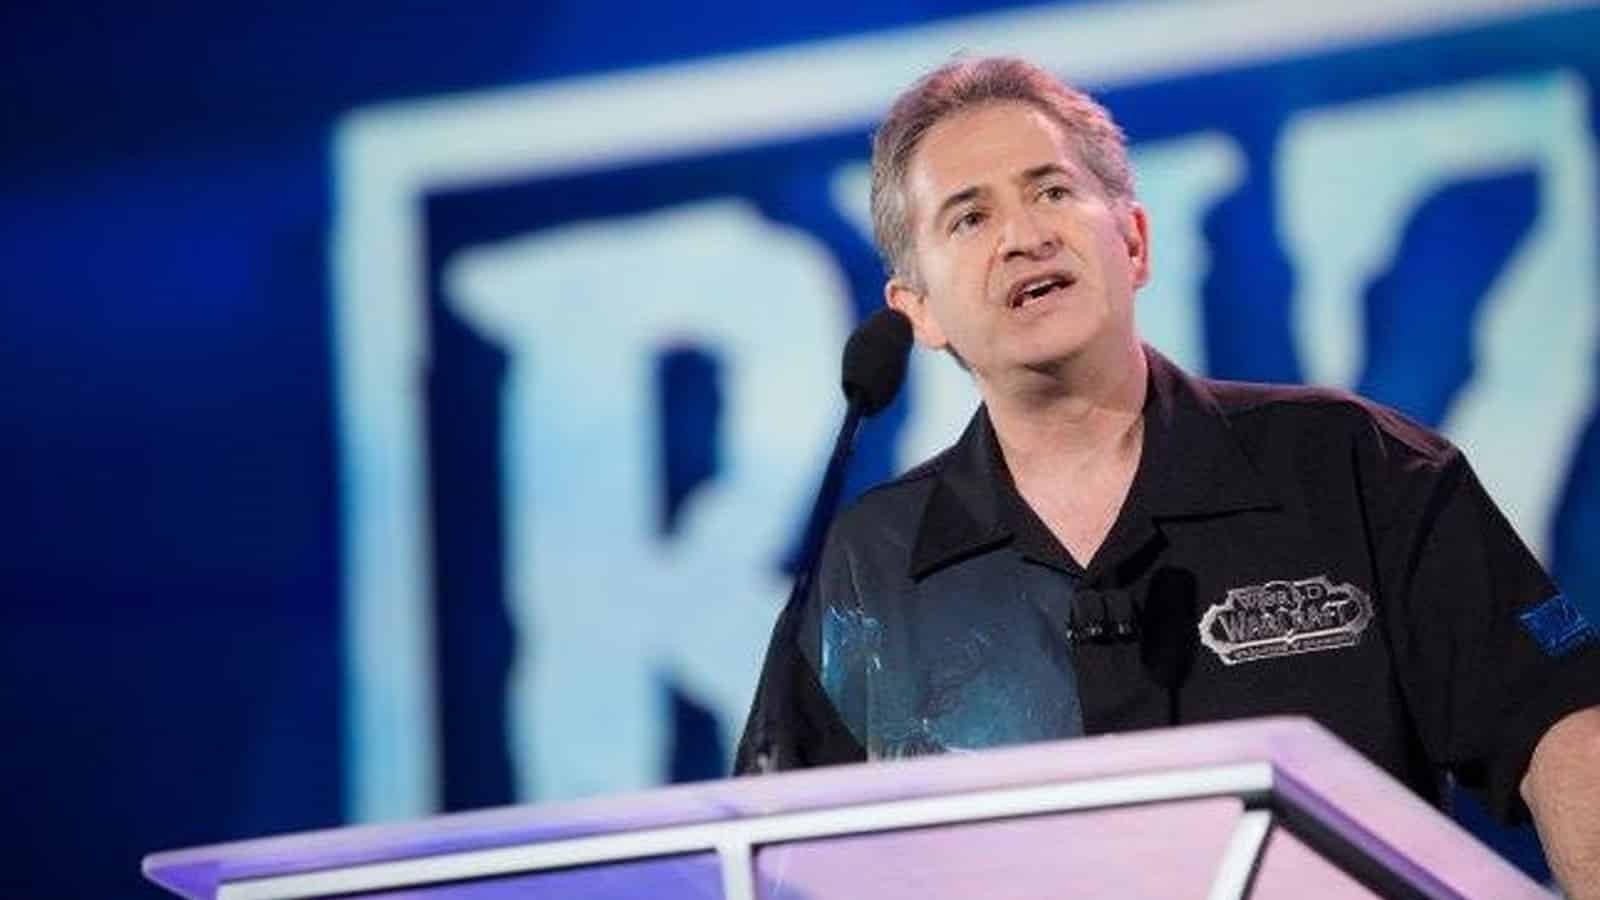 Blizzard co-founder Mike Morhaime apologizes to former employees after lawsuit